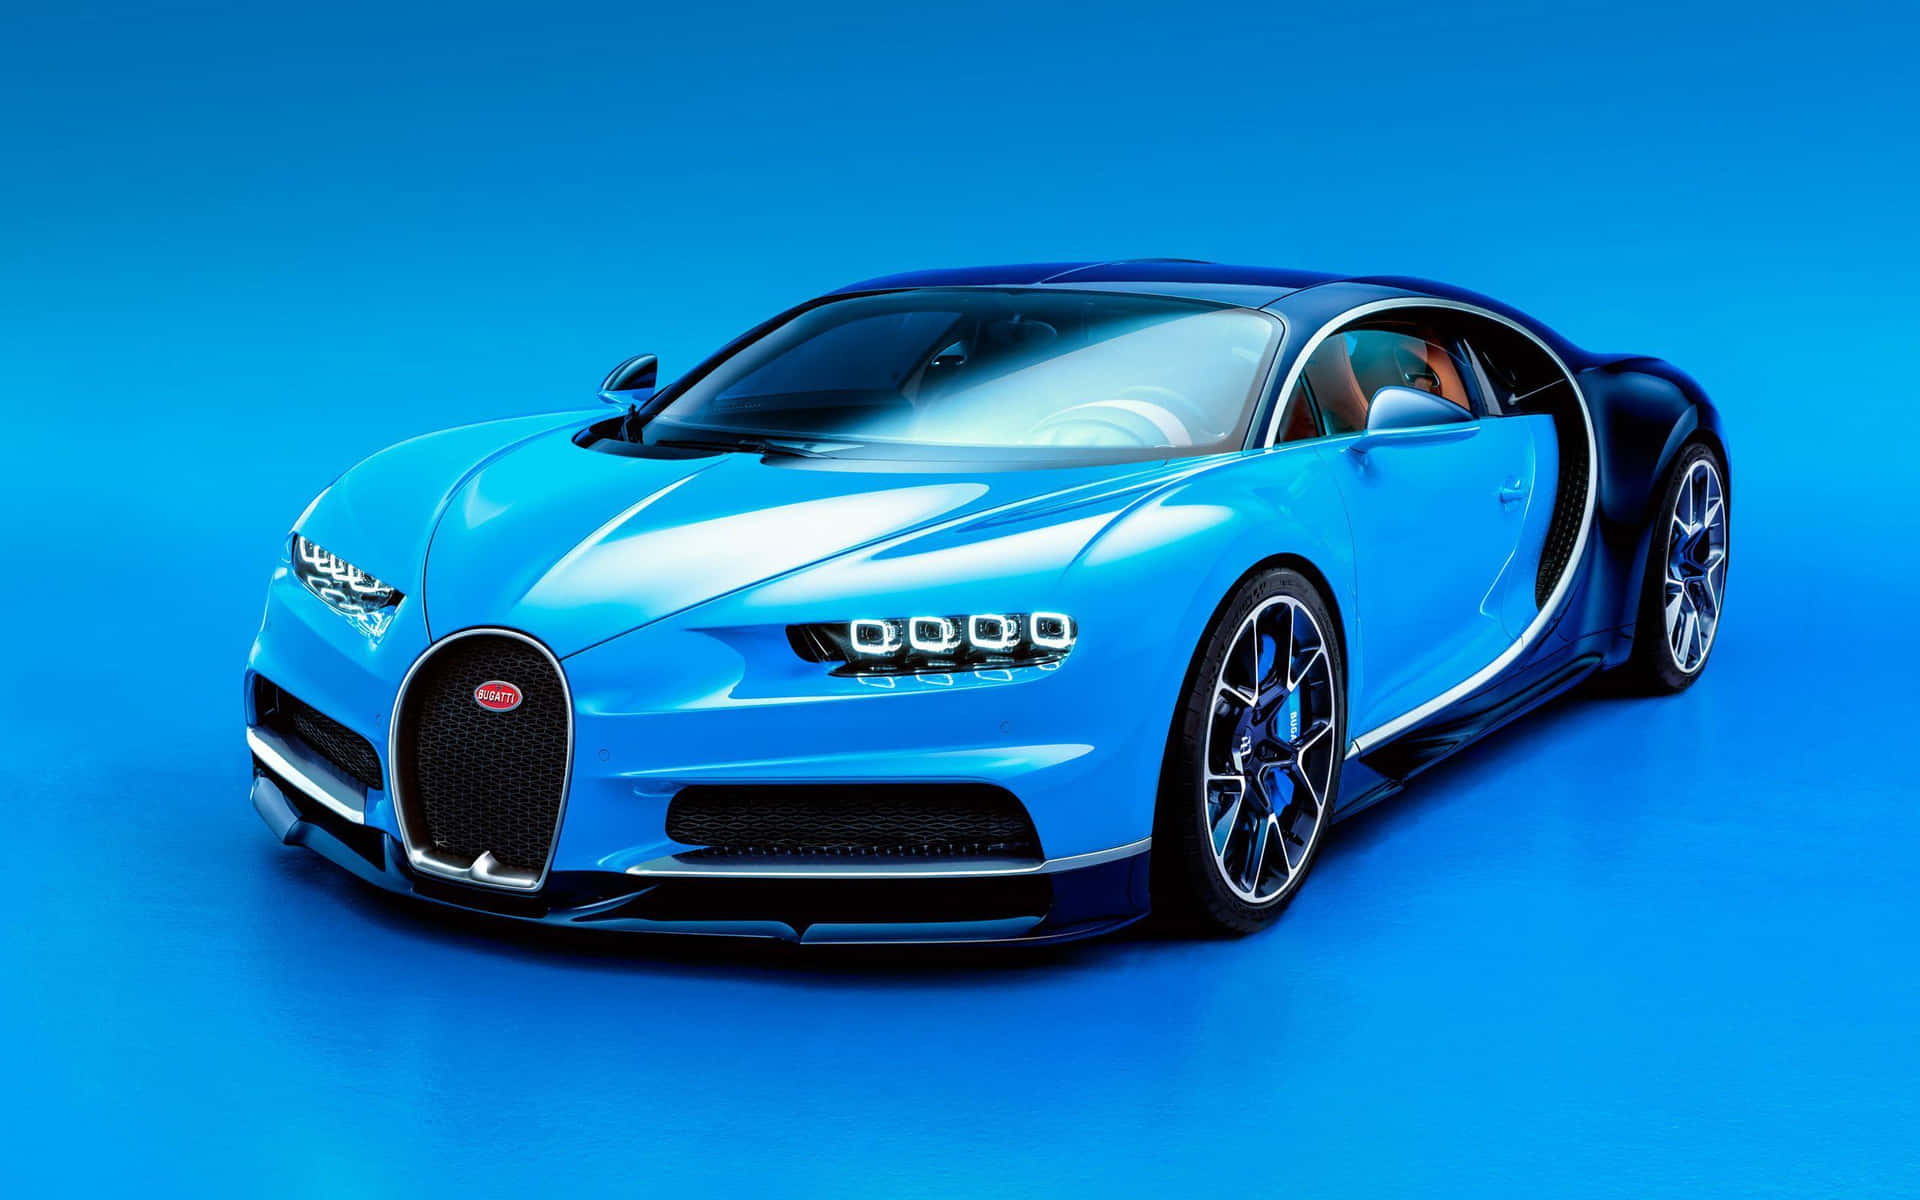 The Stunning Bugatti Chiron in Action Wallpaper